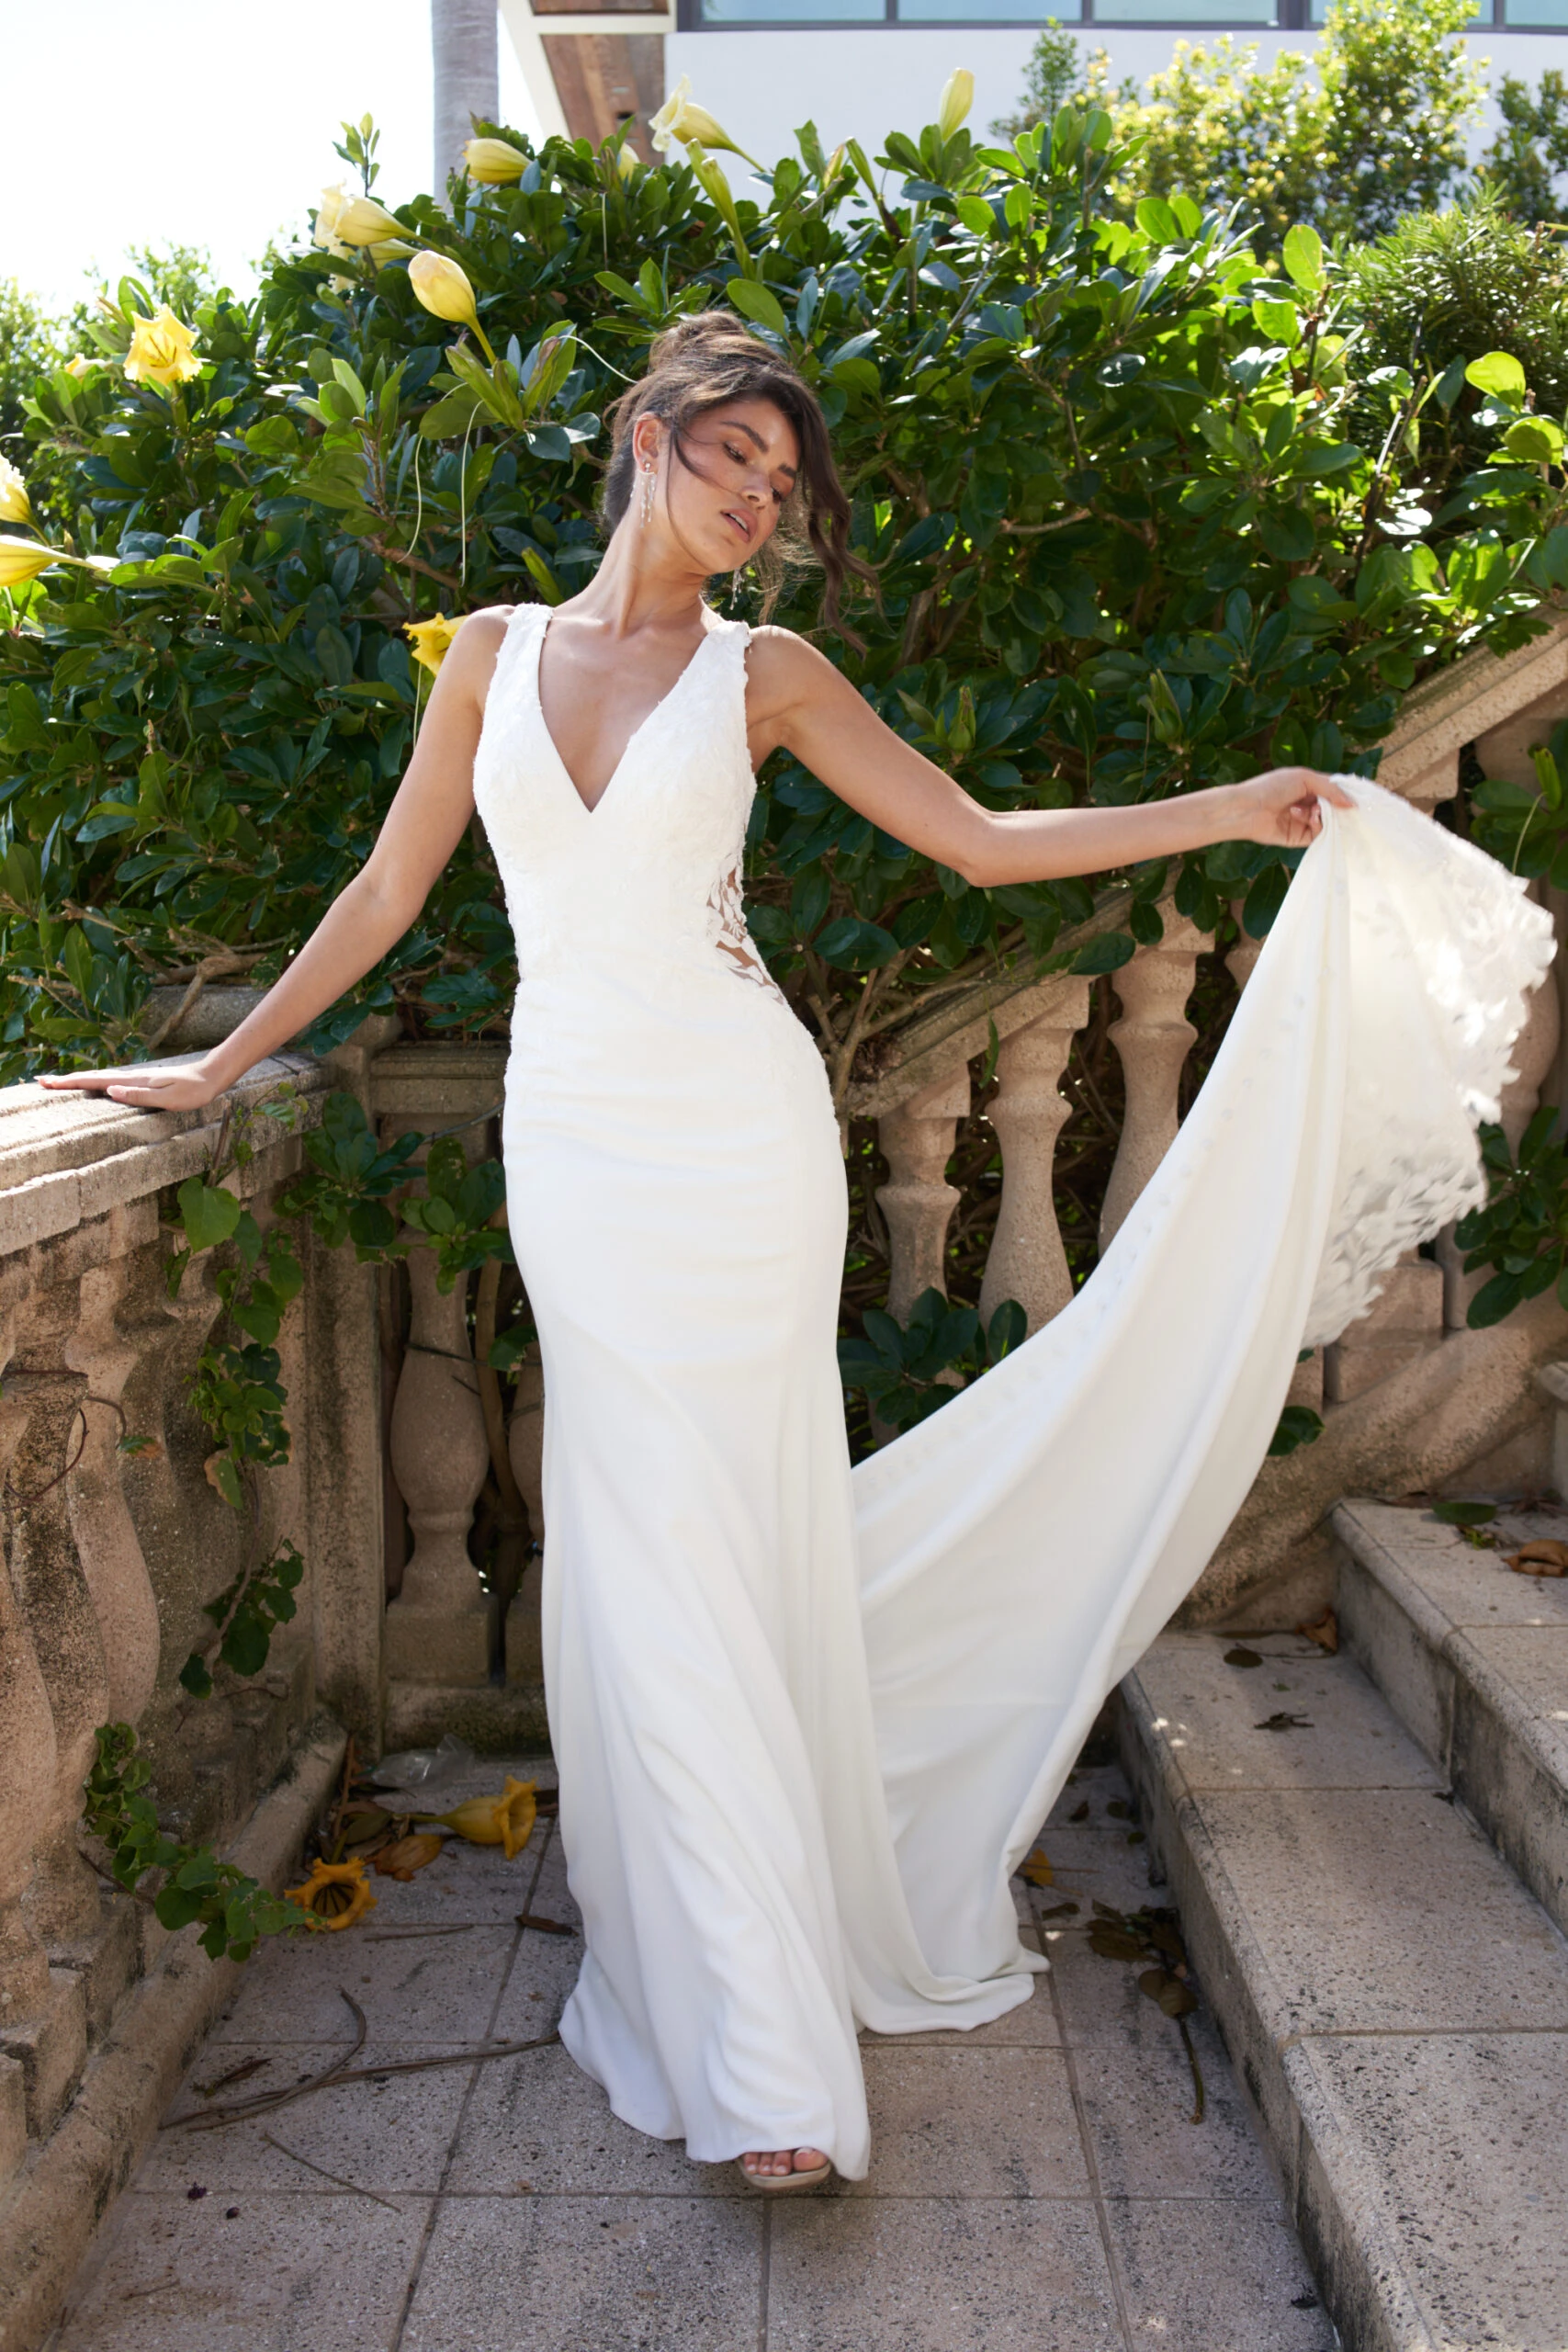 simple sheath wedding dress with lace cutouts and zipper closure - D3544 by Essense of Australia